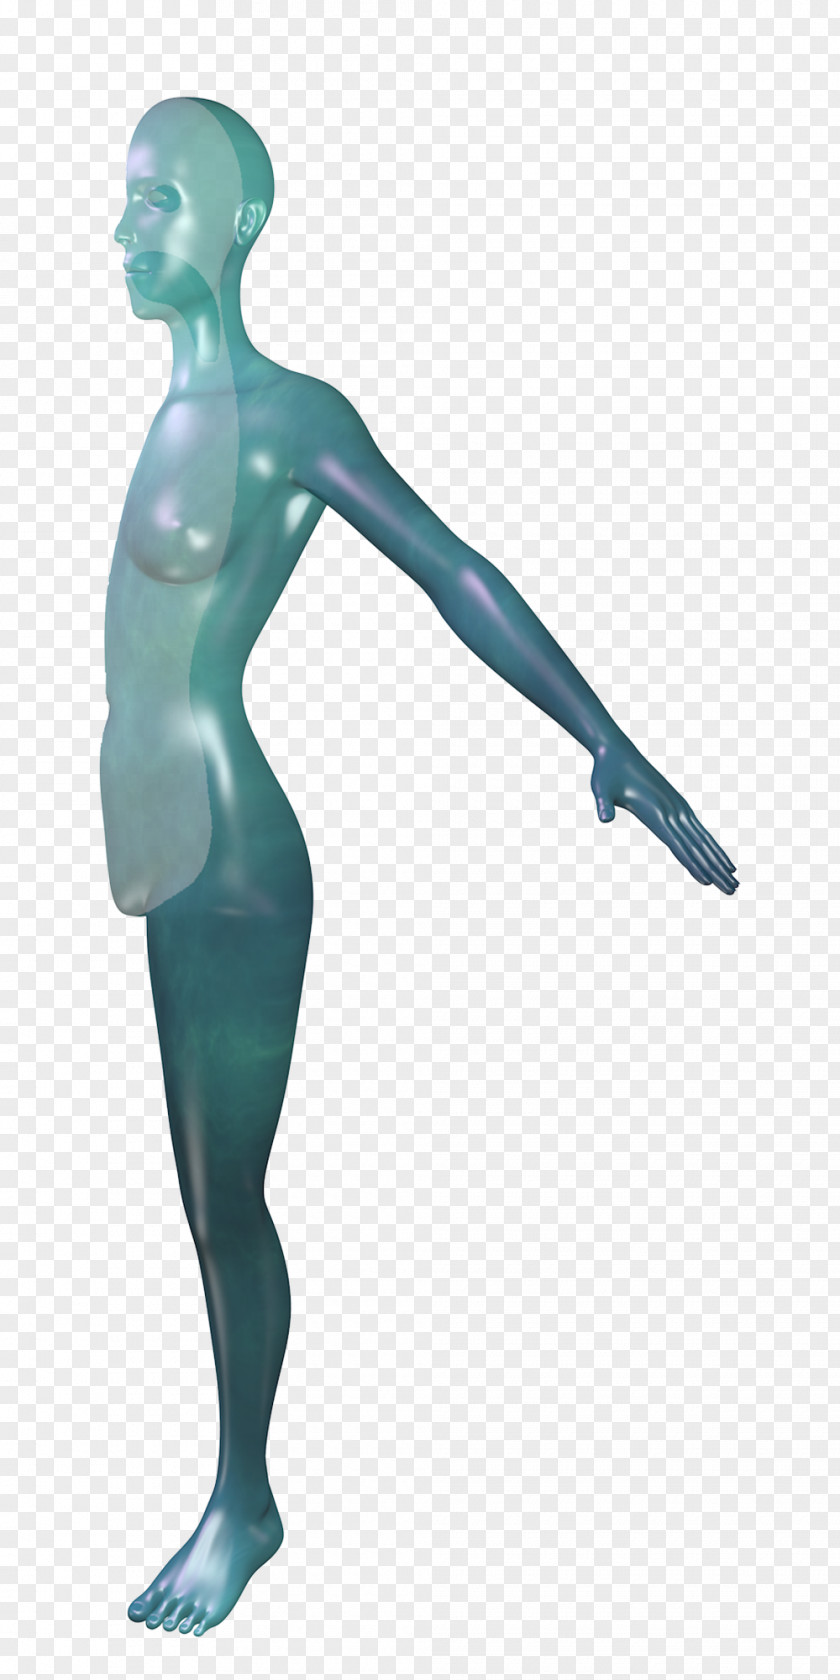 Through The Heart Of Cold Water Beads Teal Turquoise Mannequin Figurine Joint PNG